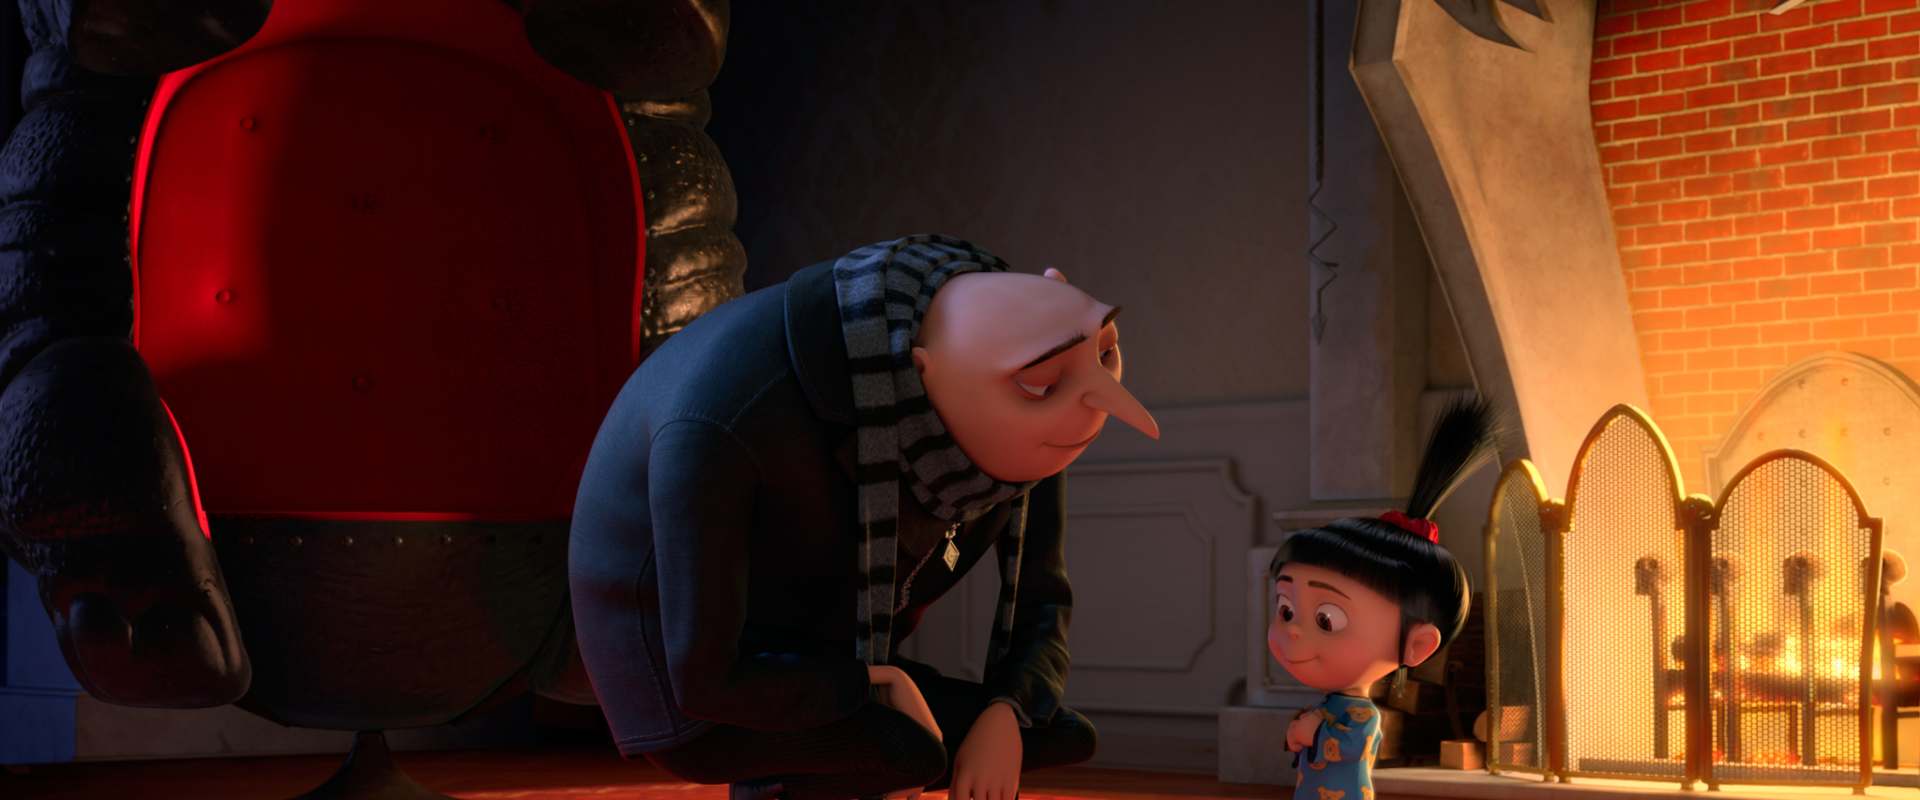 Despicable Me 2 background 2